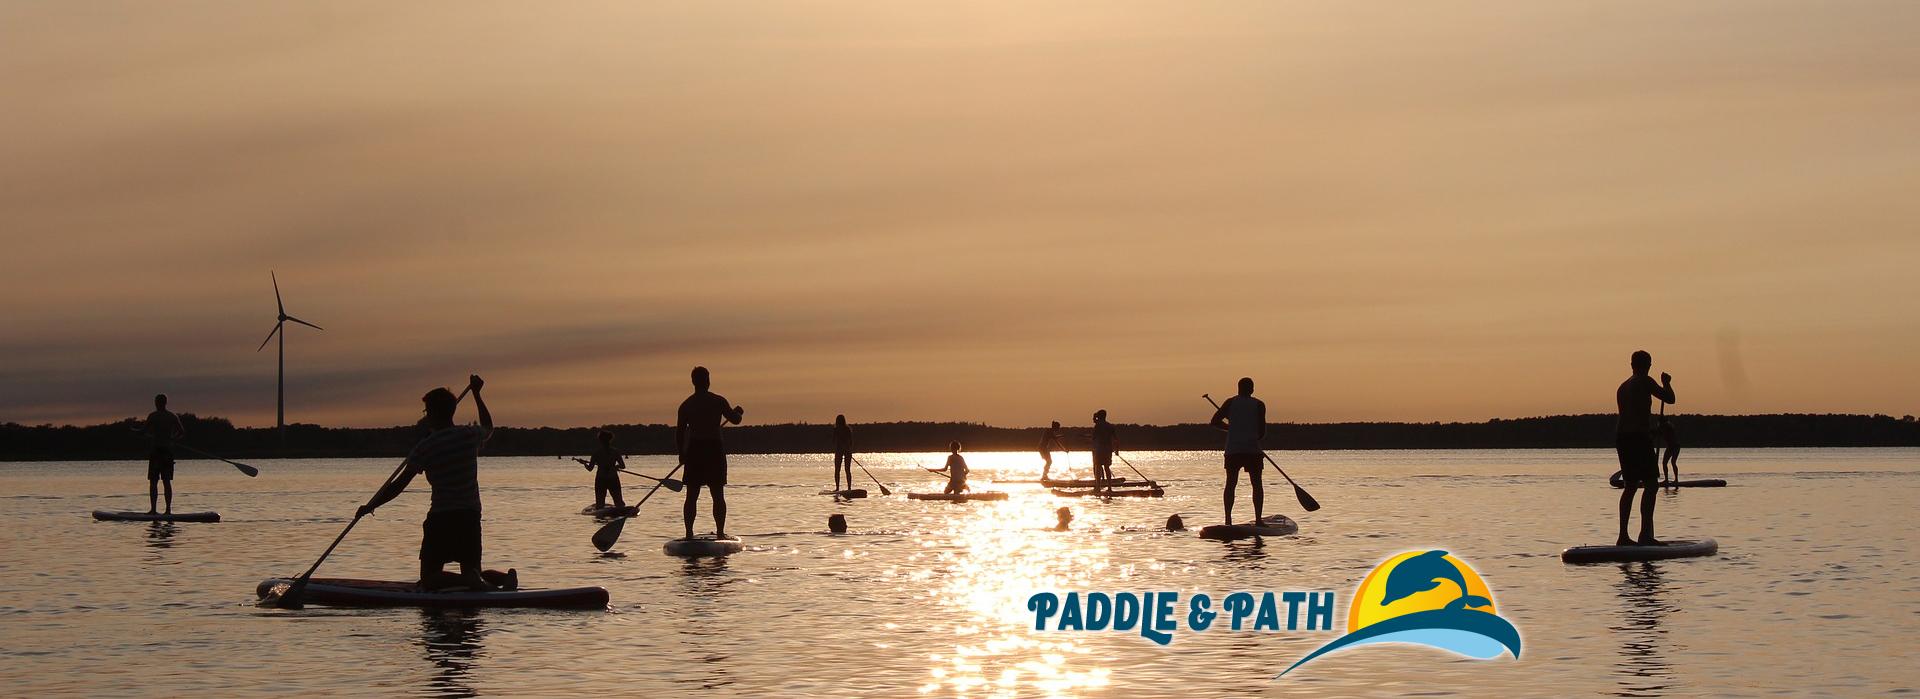 paddle and path - banner